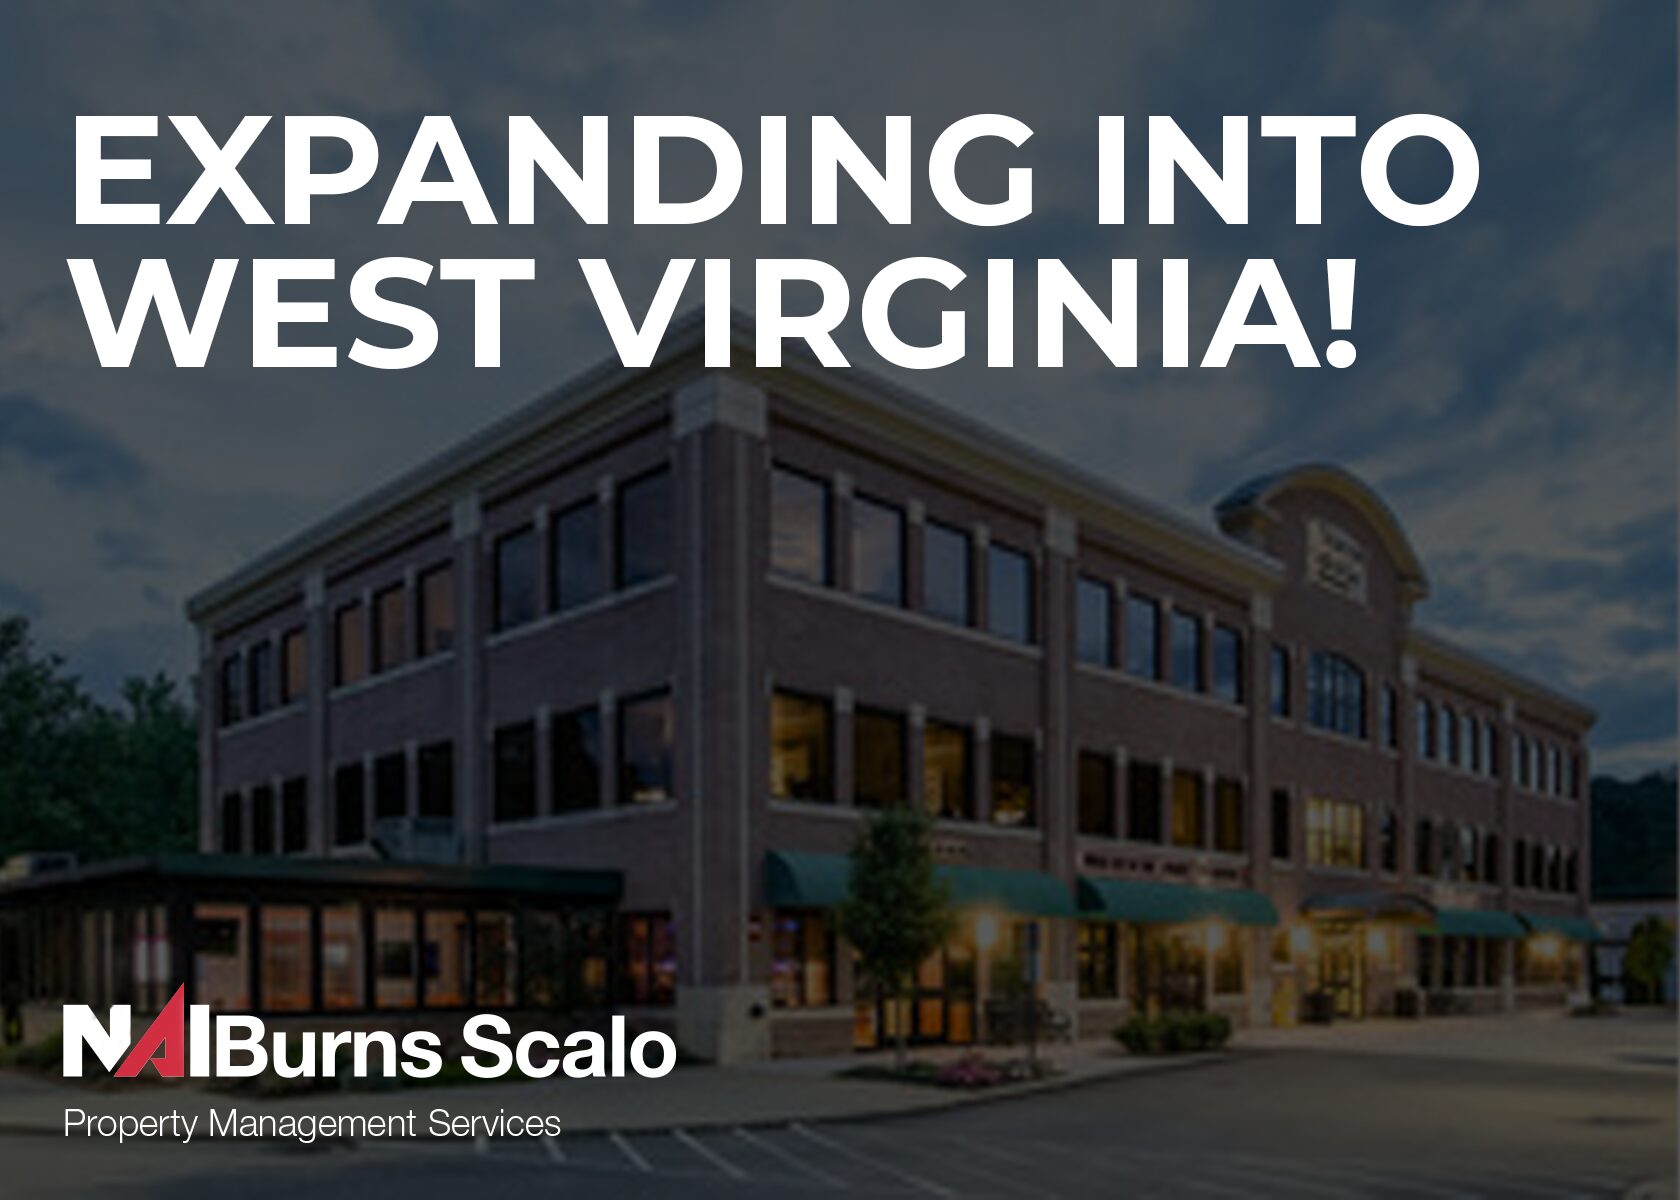 nai burns scalo expands property management services into west virginia